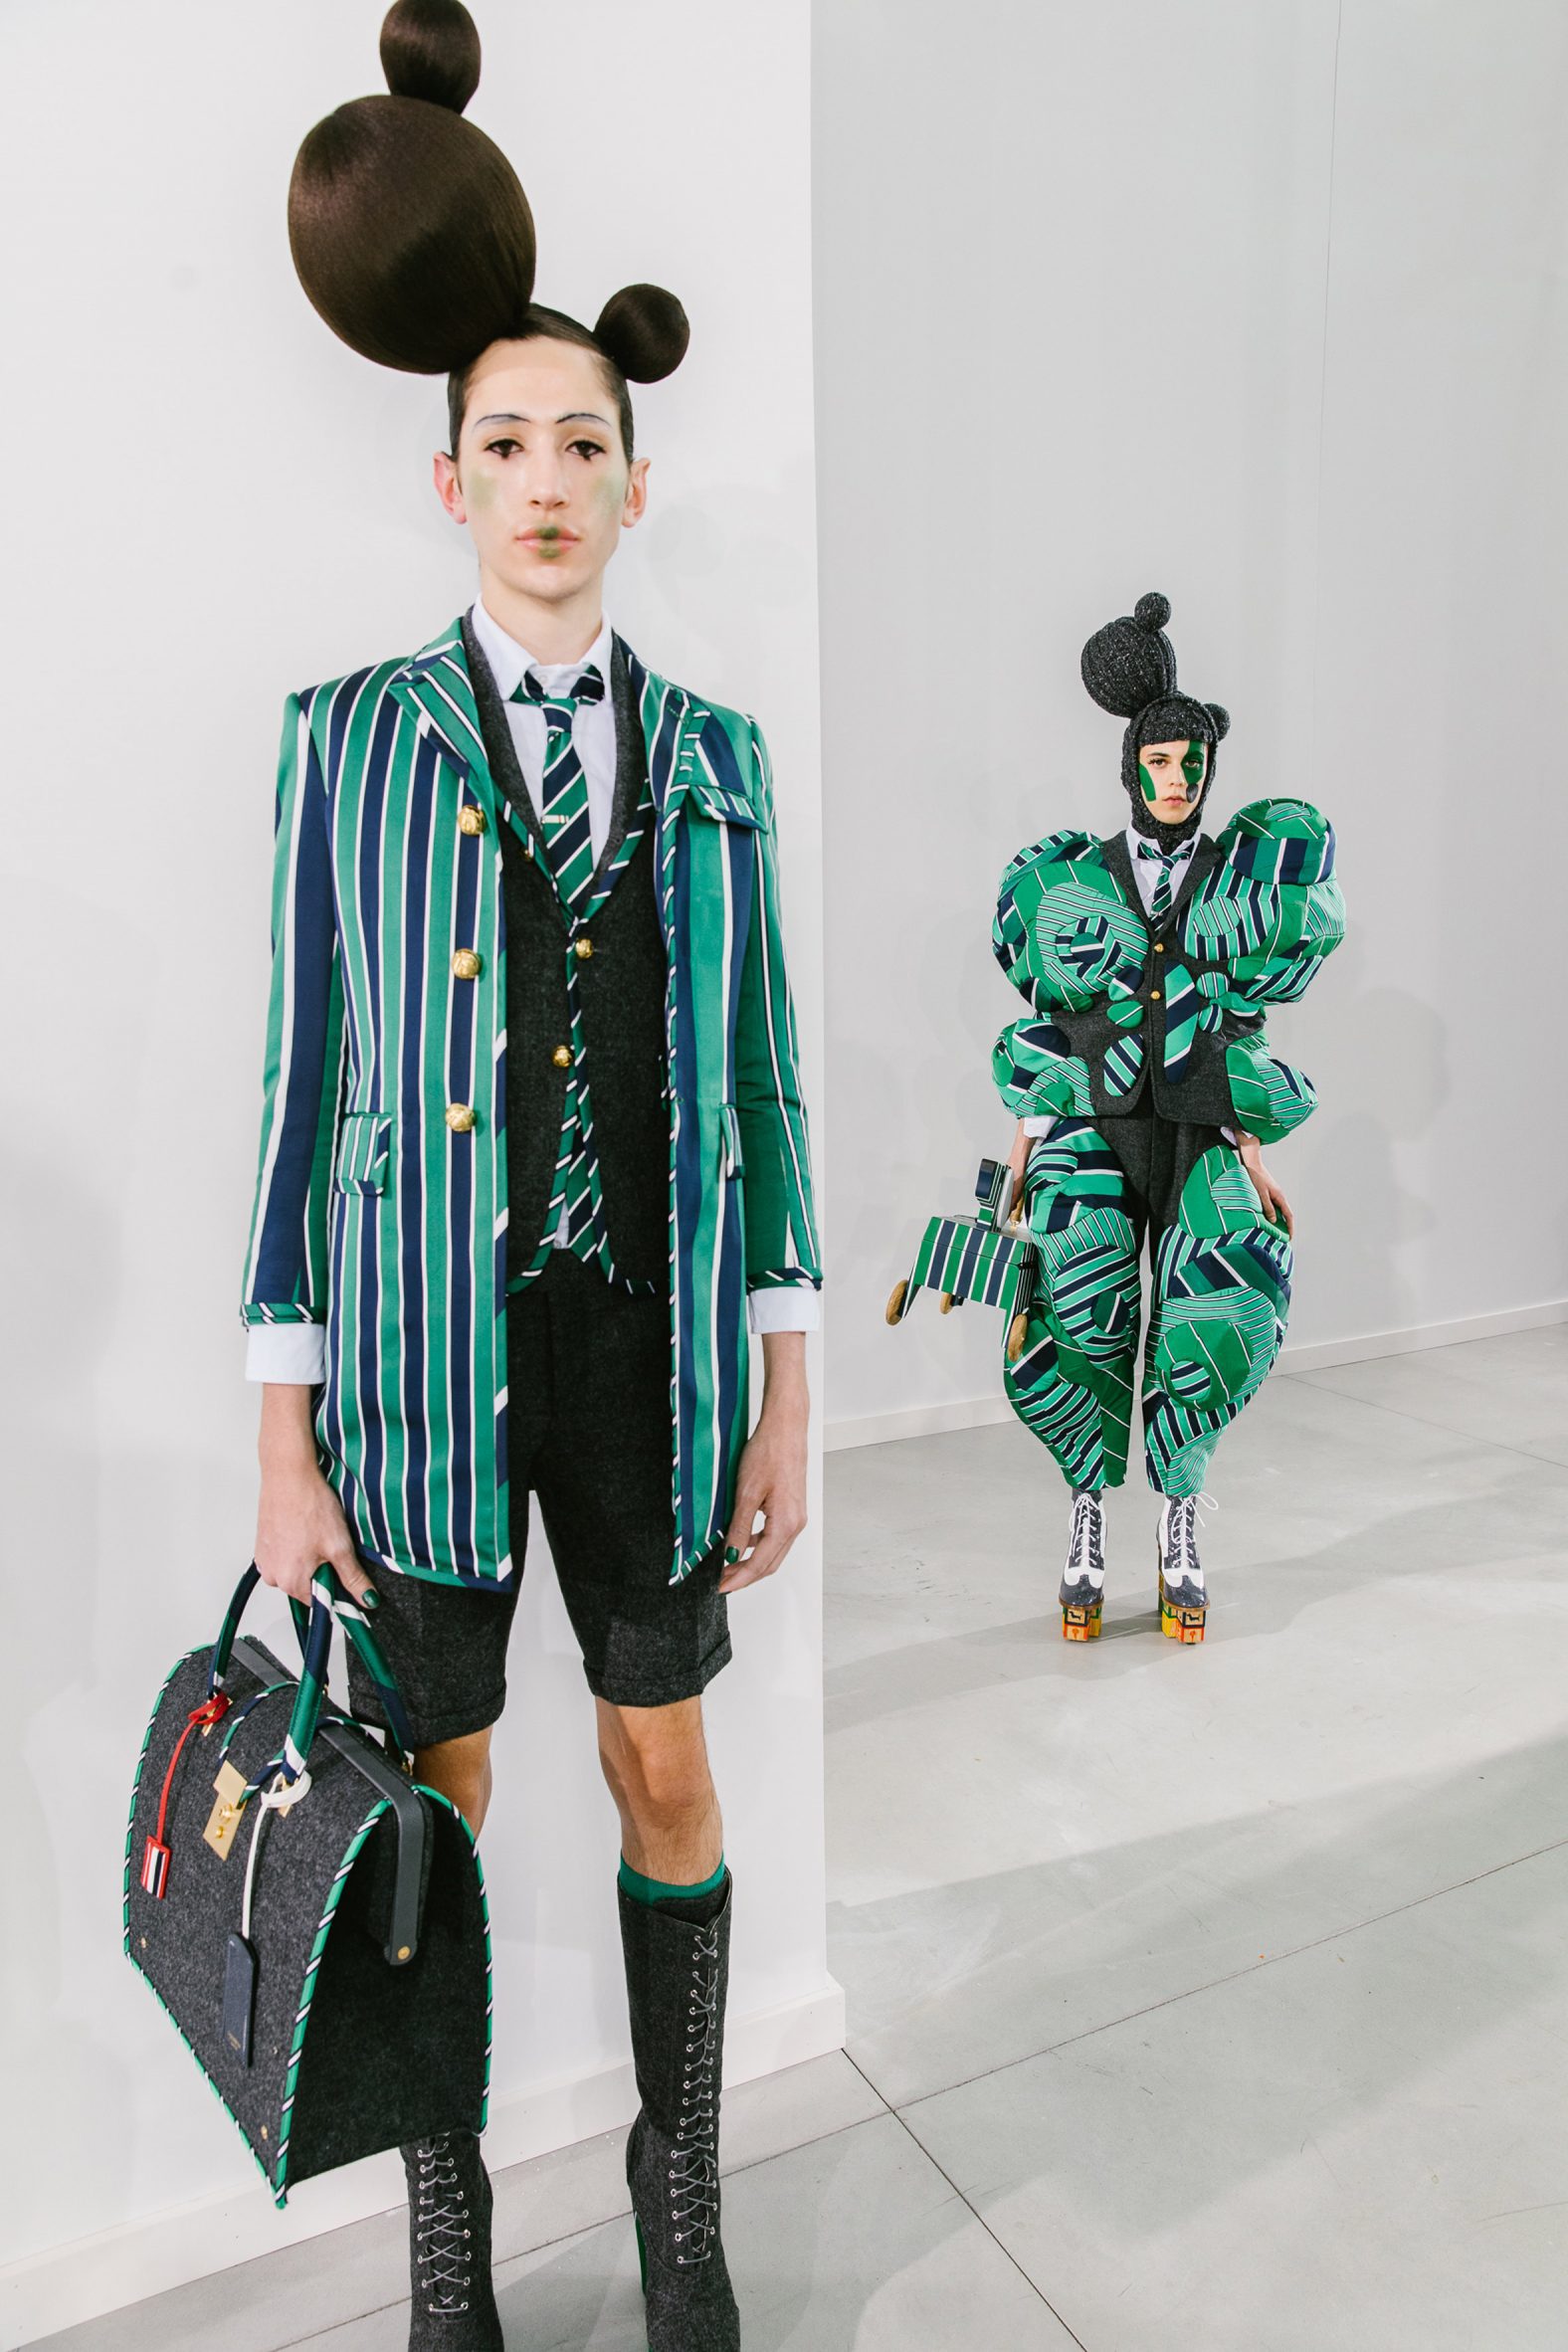 Thom Browne holds teddy talk for toy-inspired collection